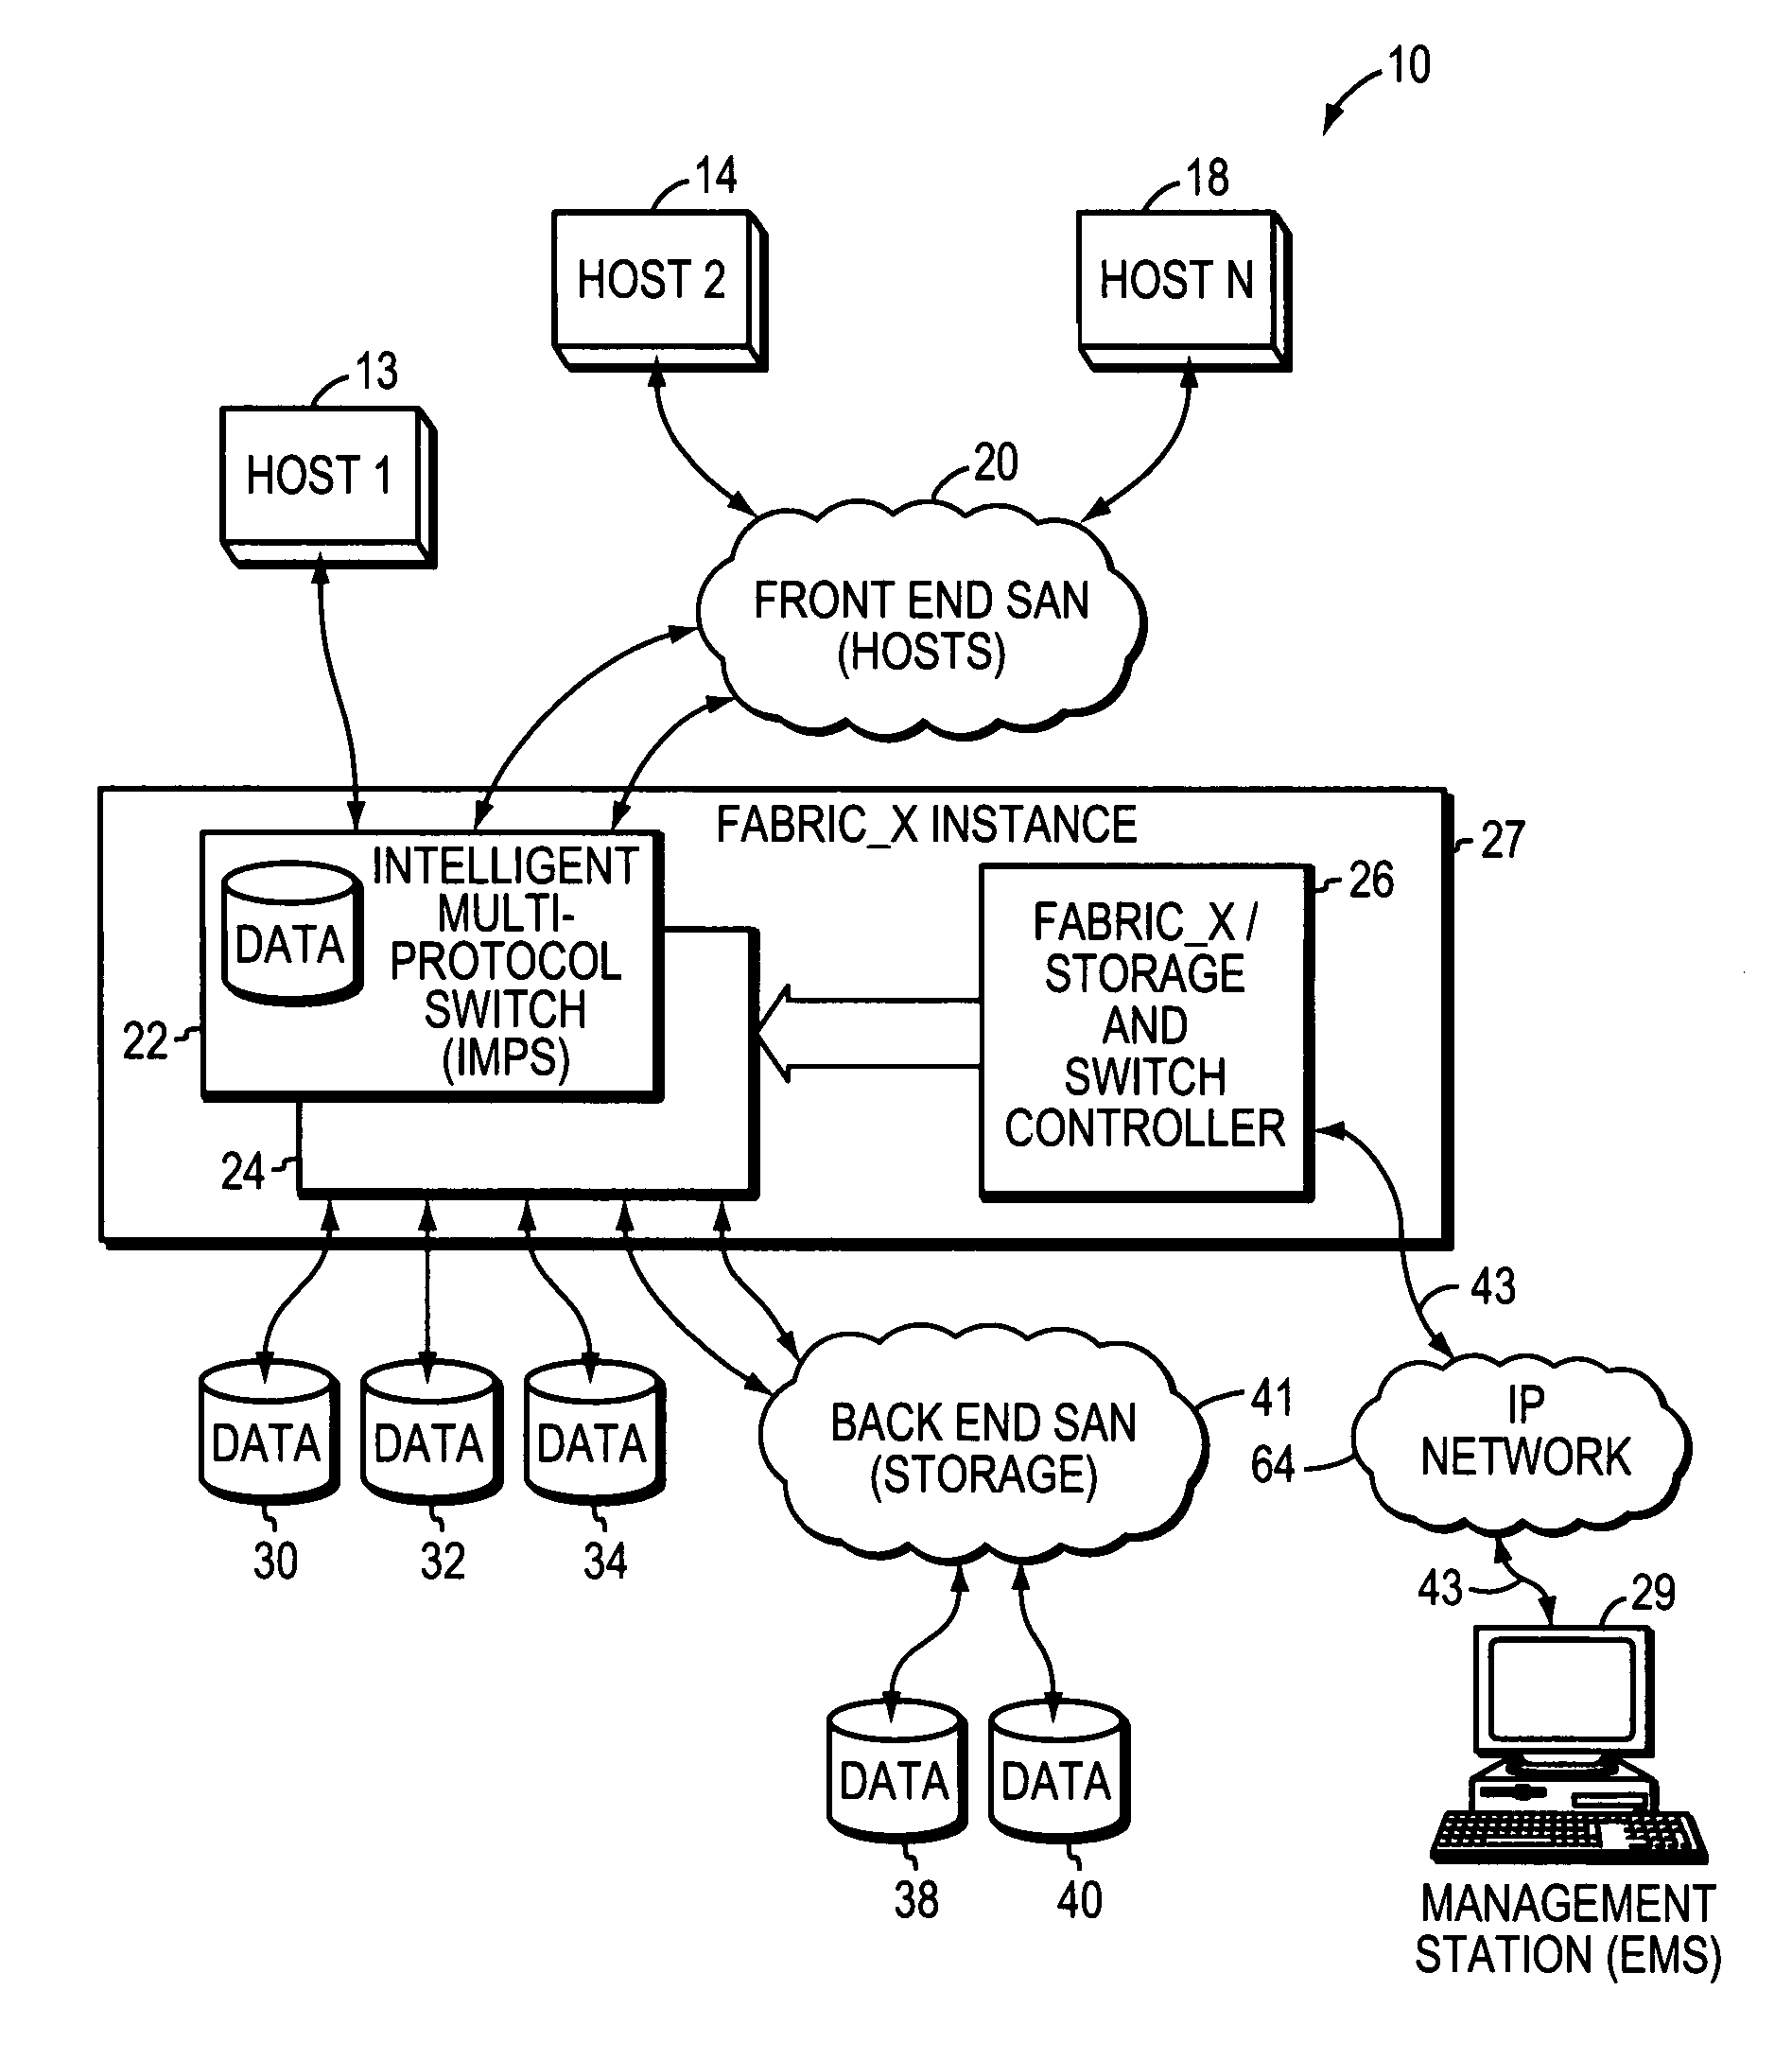 System and method for managing provisioning of storage resources in a network with virtualization of resources in such a network